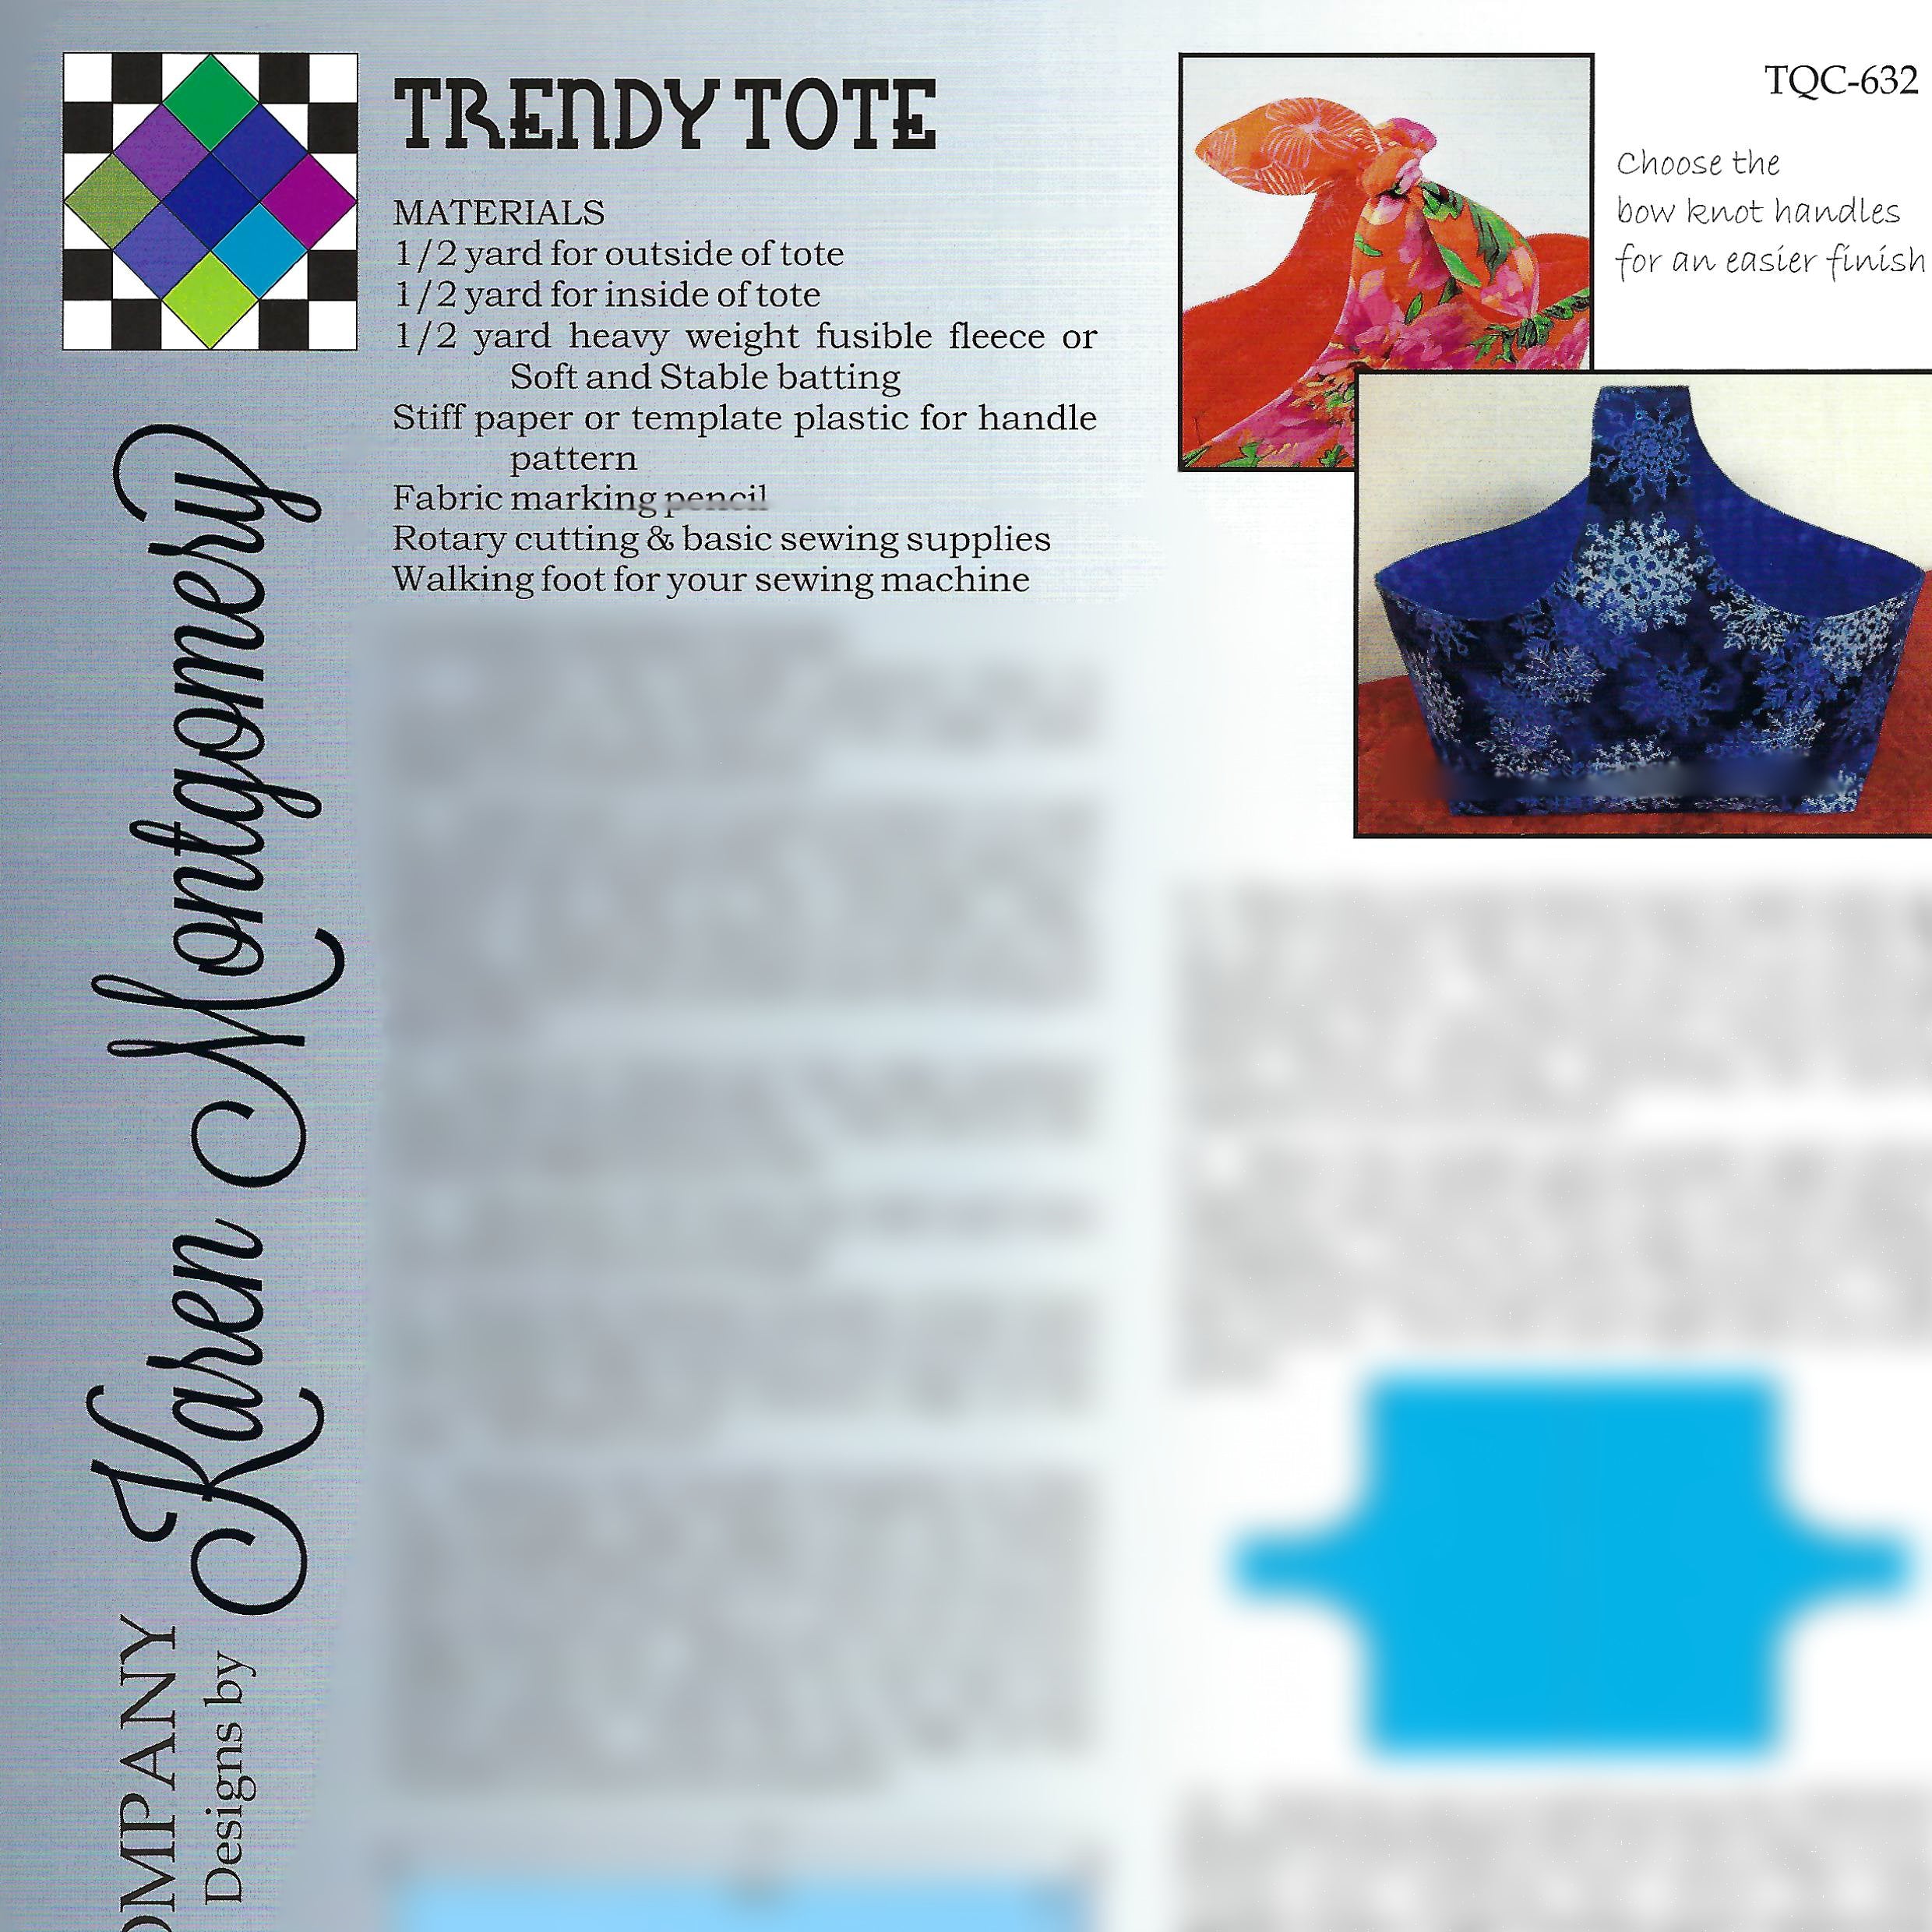 Trendy Tote Project Sheet